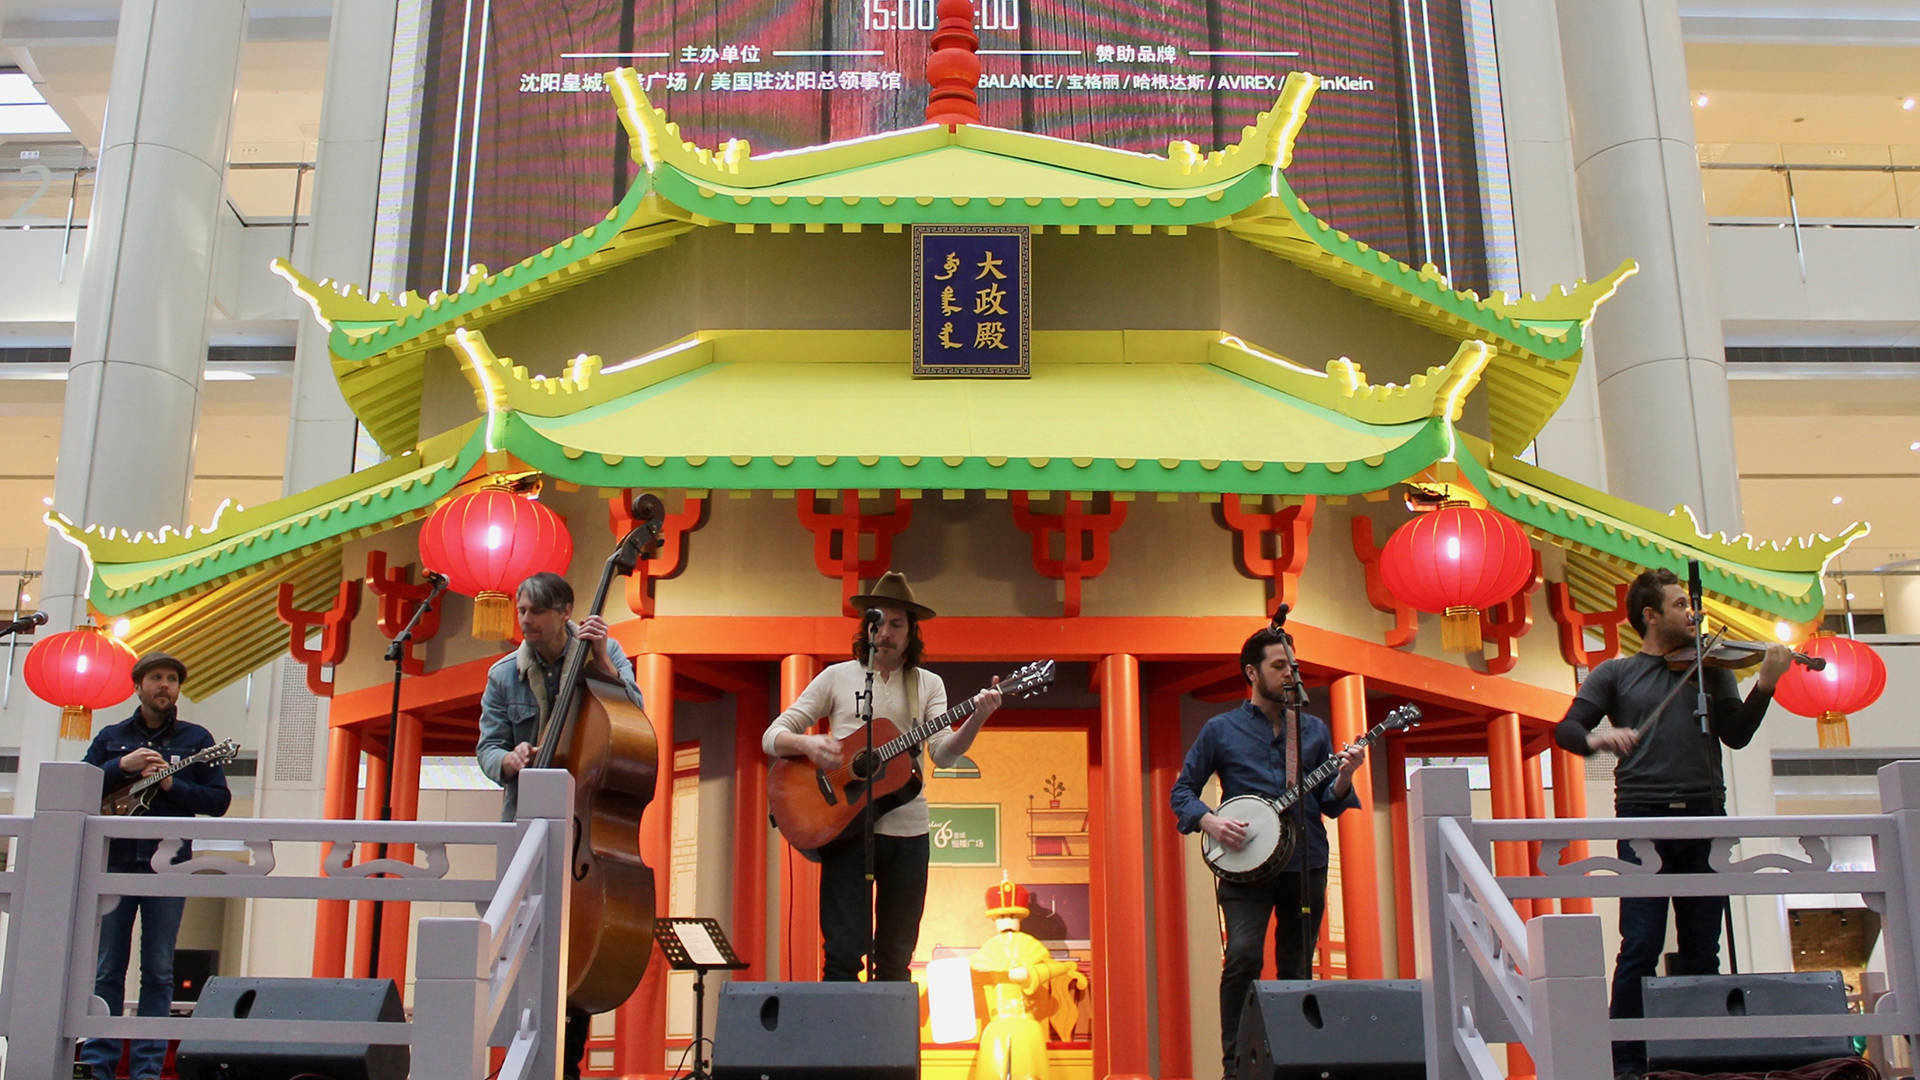 The Brothers Comatose perform at the Shenyang Mall. Mickey Davis/American Music Abroad Program